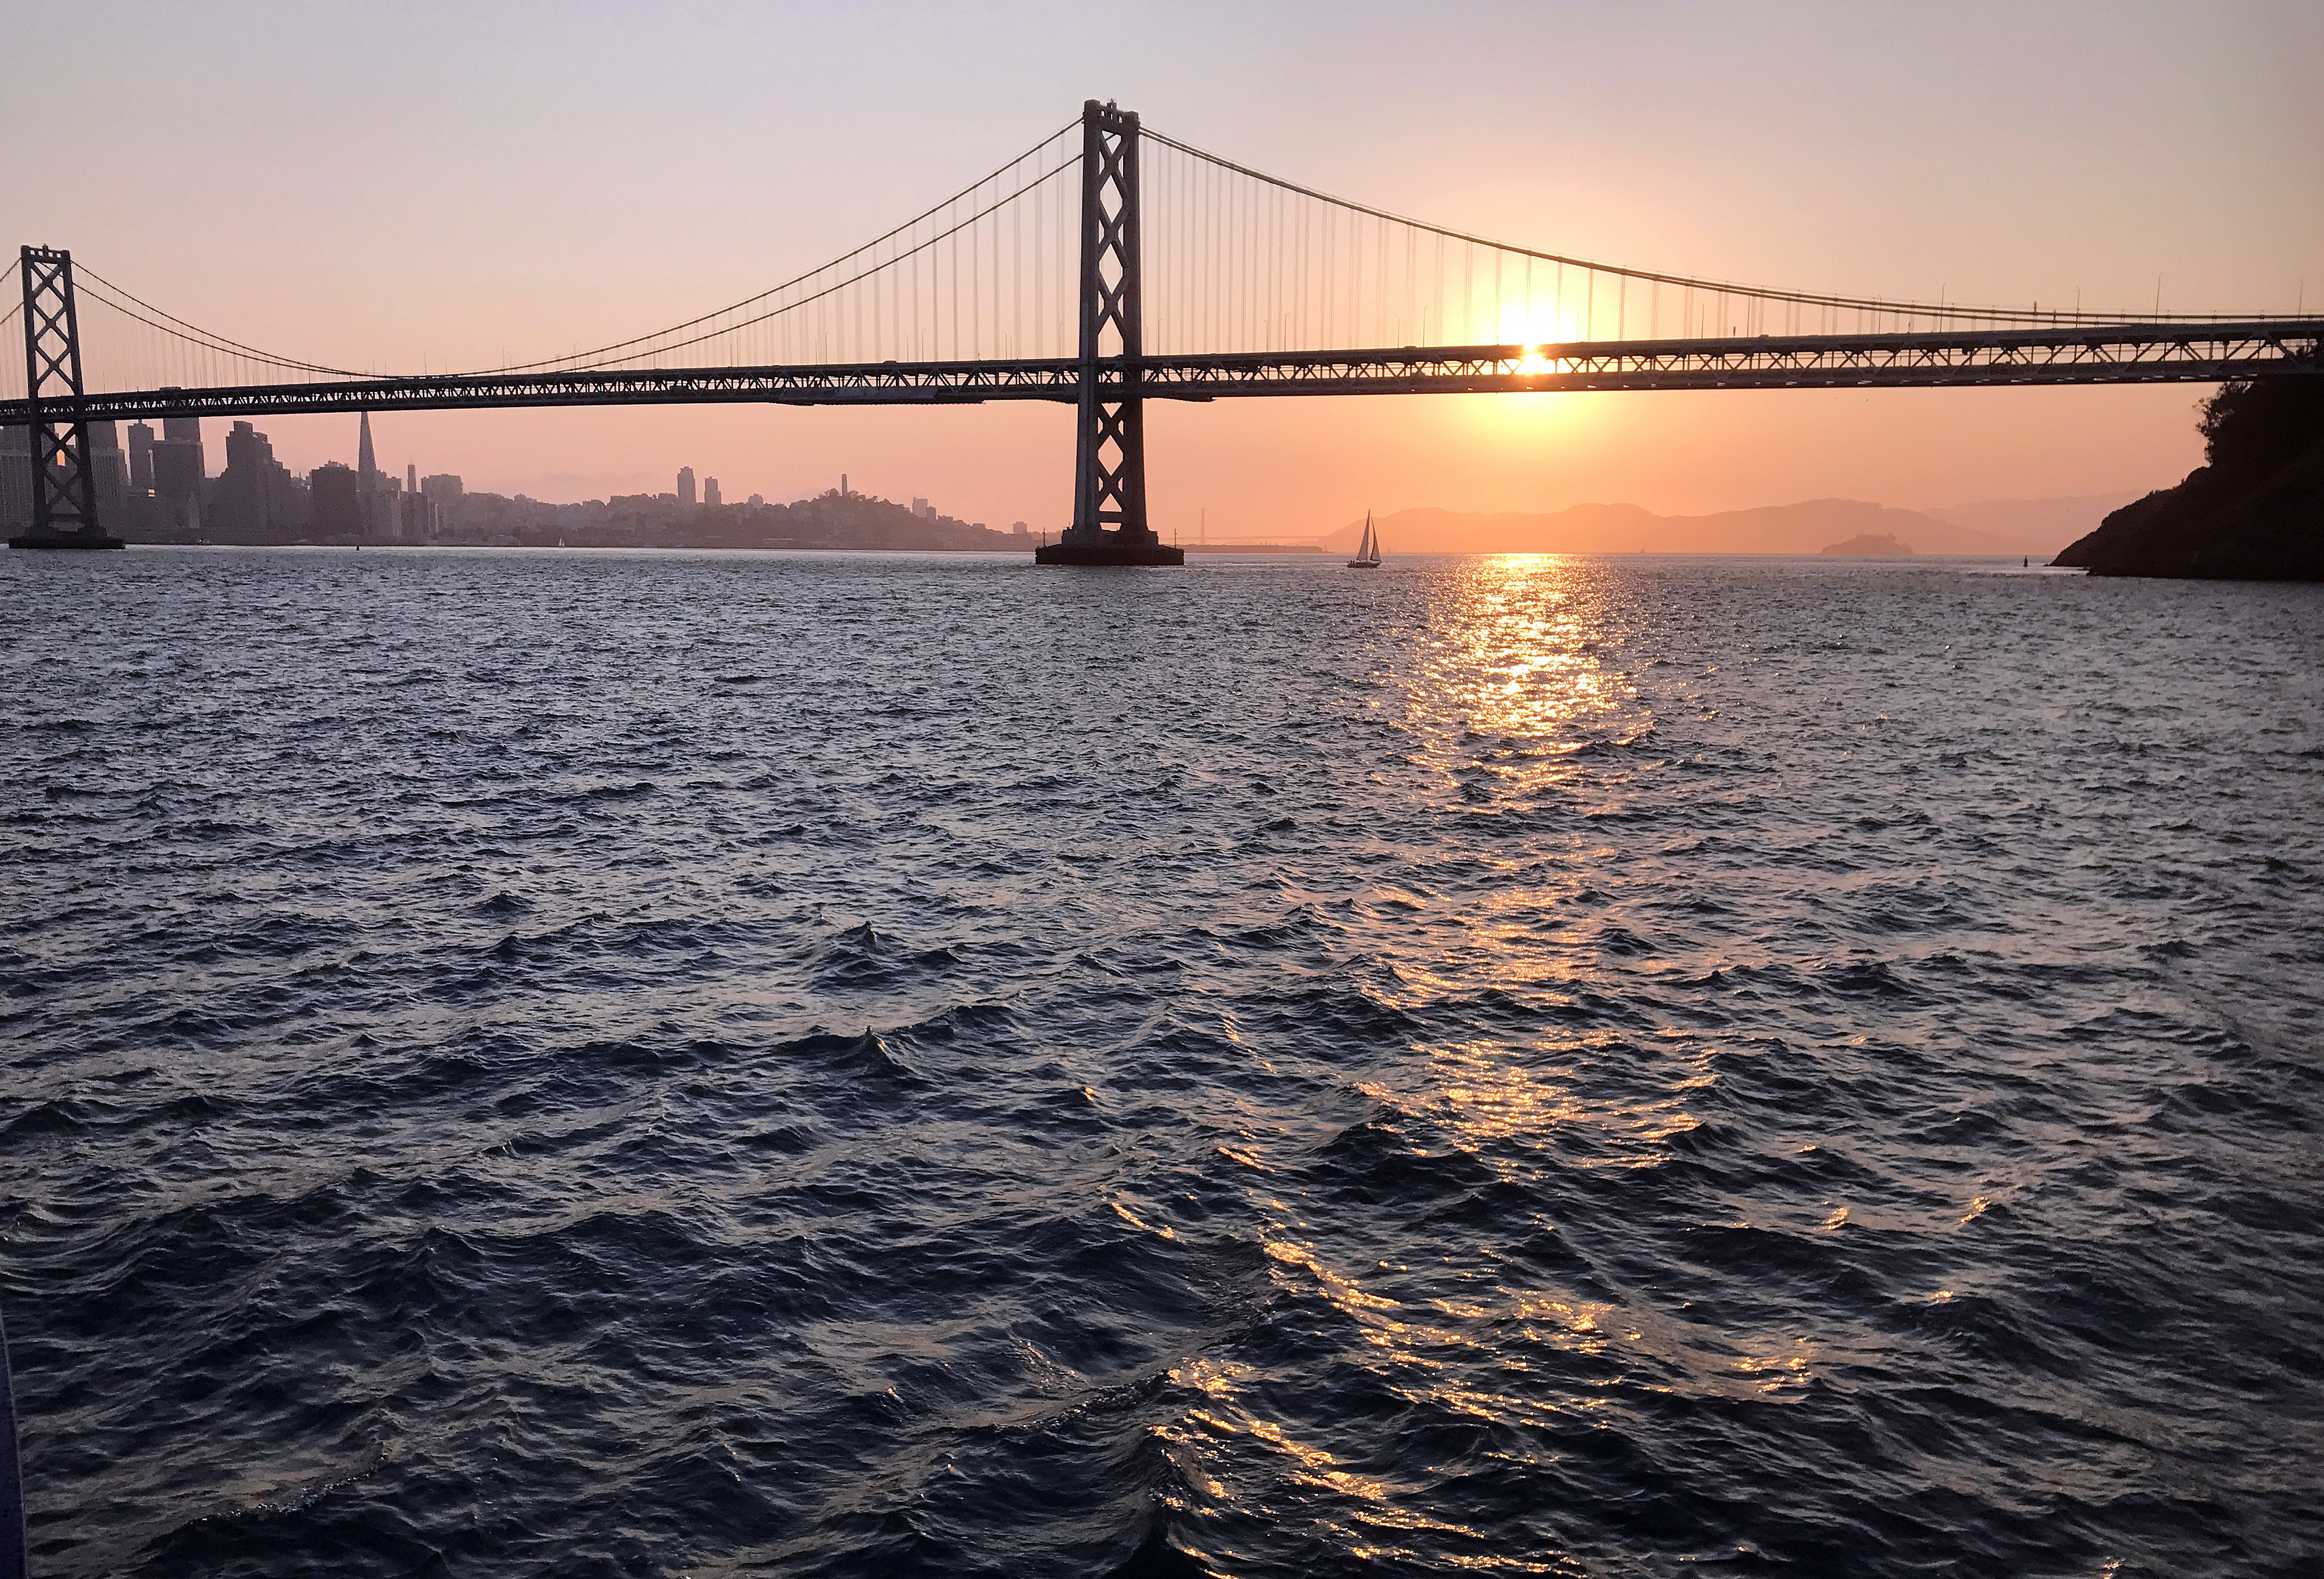 View of San Francisco Bay Bridge at sunset, with San Francisco in the background, in California